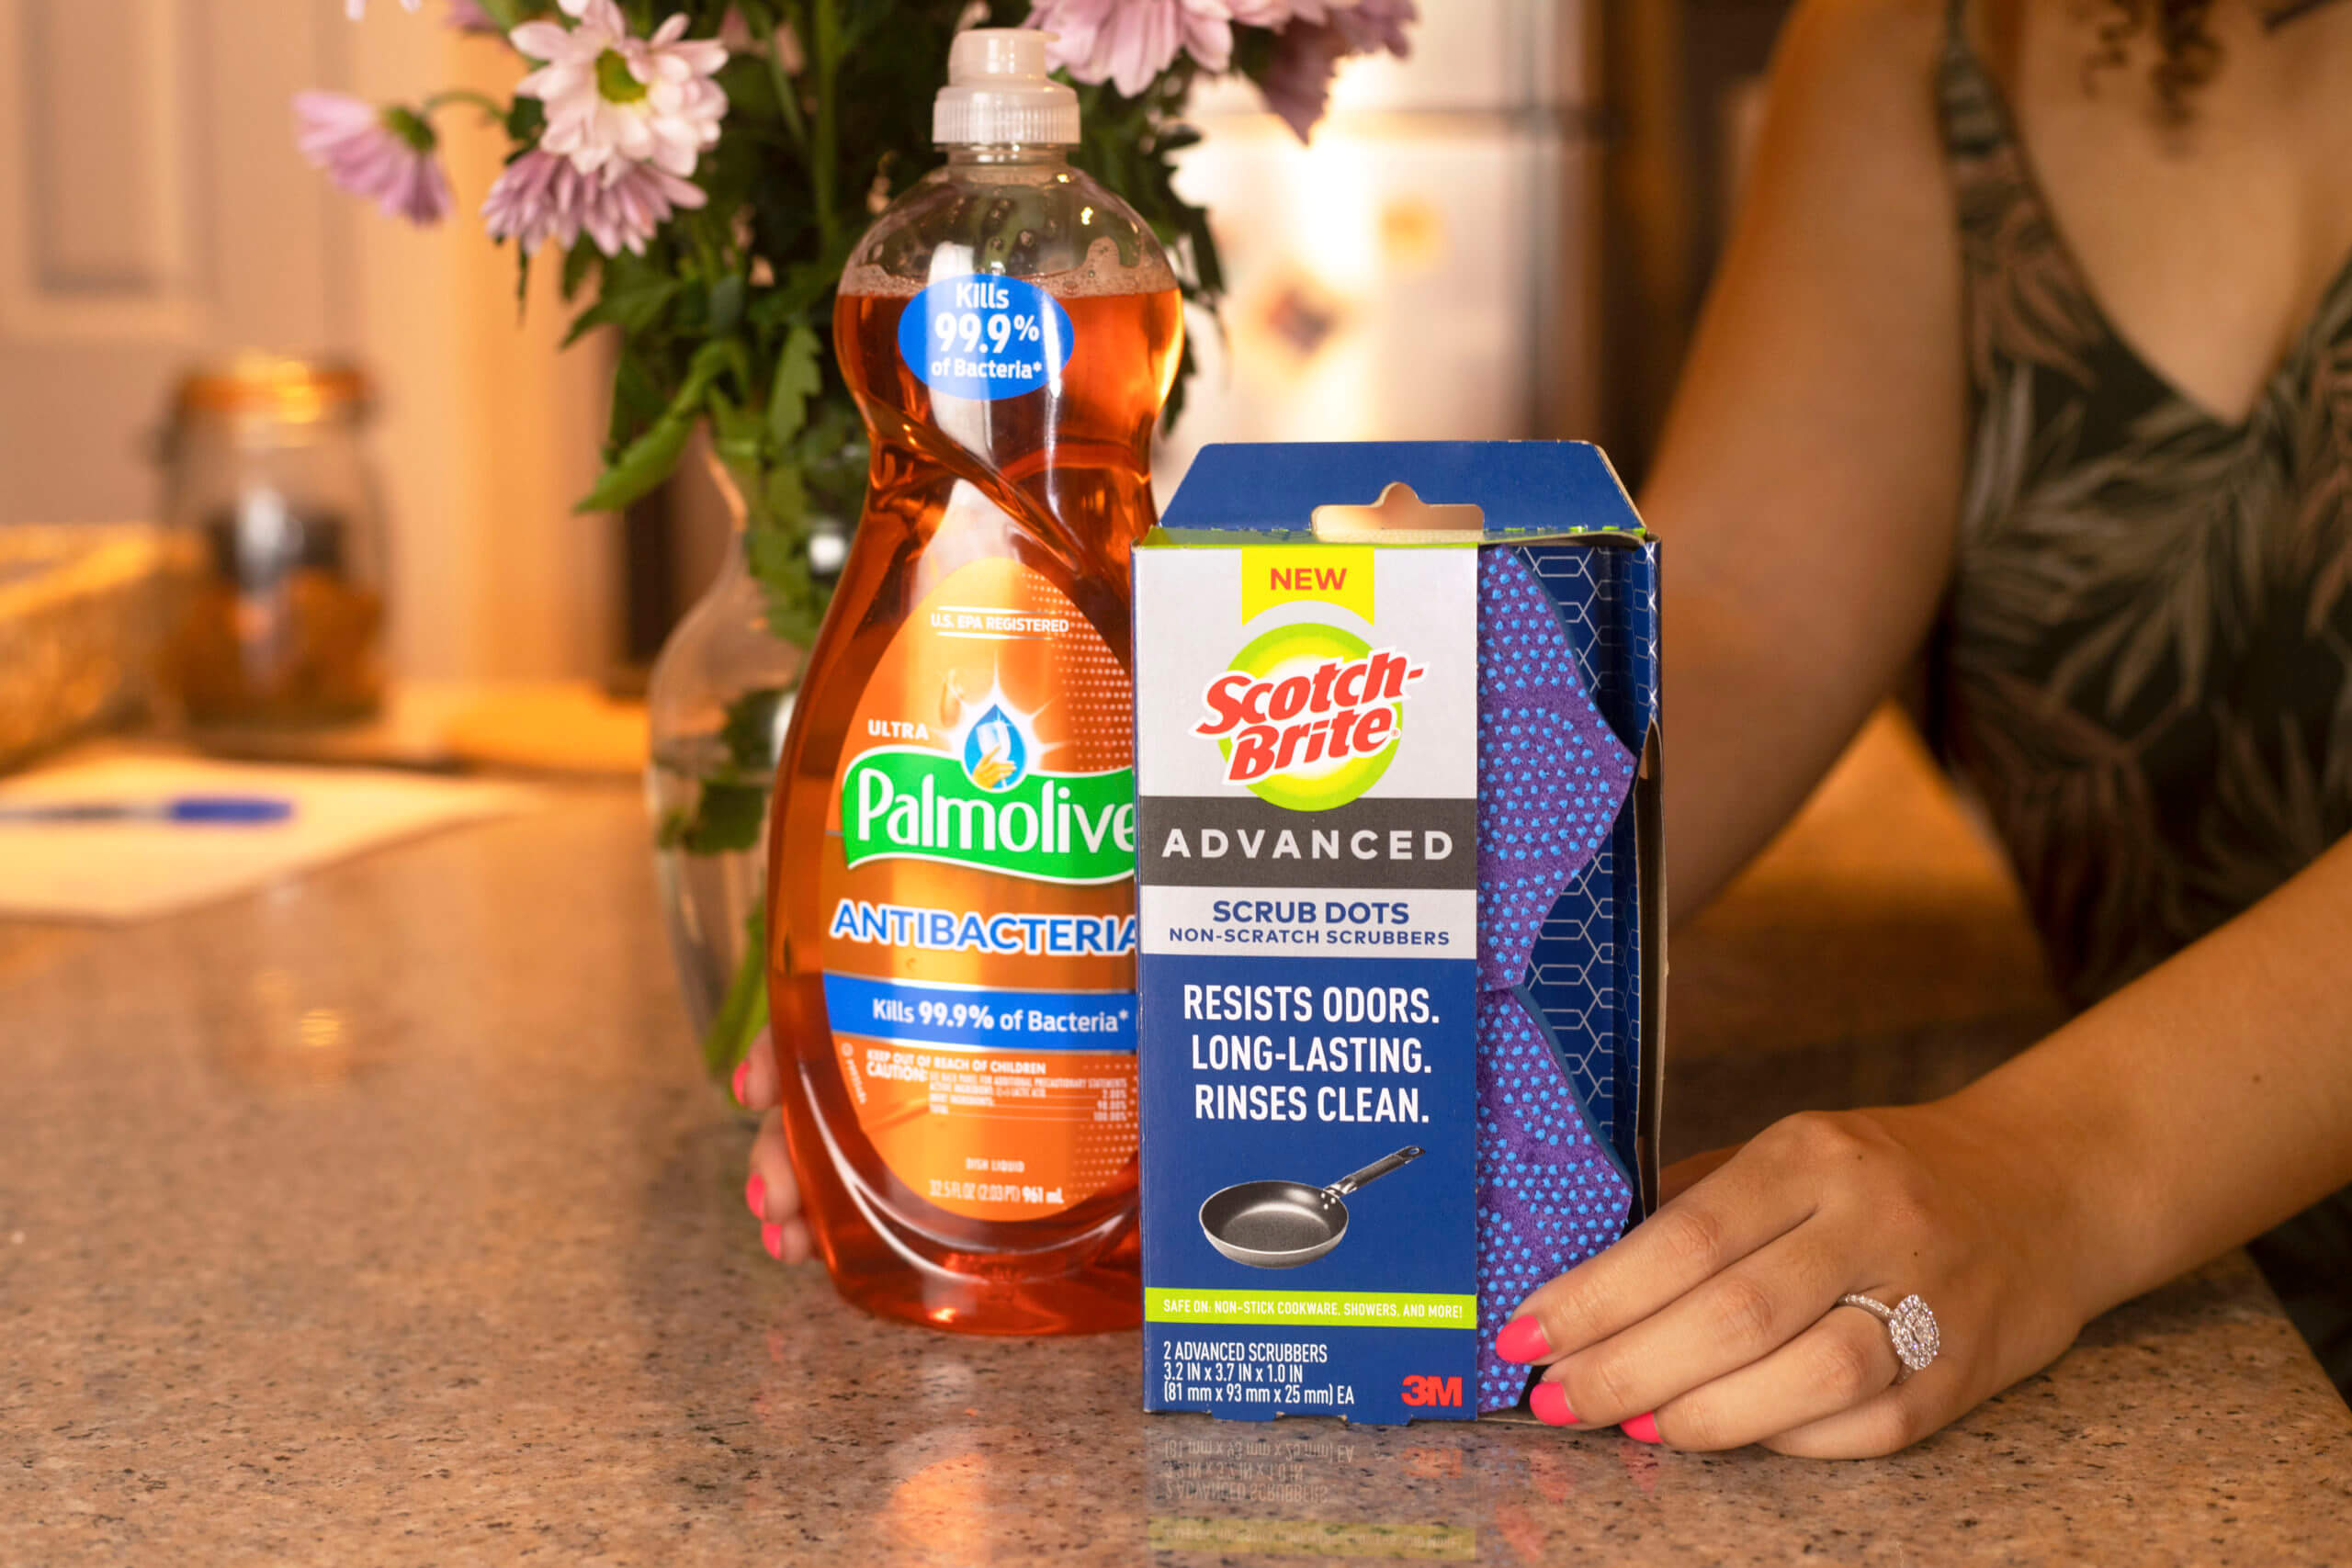 When it comes to splitting up chores with your spouse, it’s important to have an open communication about your expectations and find a routine that works for you! #AD While my partner and I don’t have the miracle cure for housechores, we can agree on the products that we use in our house. We’ve been loving the Scotch-Brite Advanced Scrub Dots Non-Scratch Scrubbers and the Palmolive Ultra Antibacterial dish detergent.